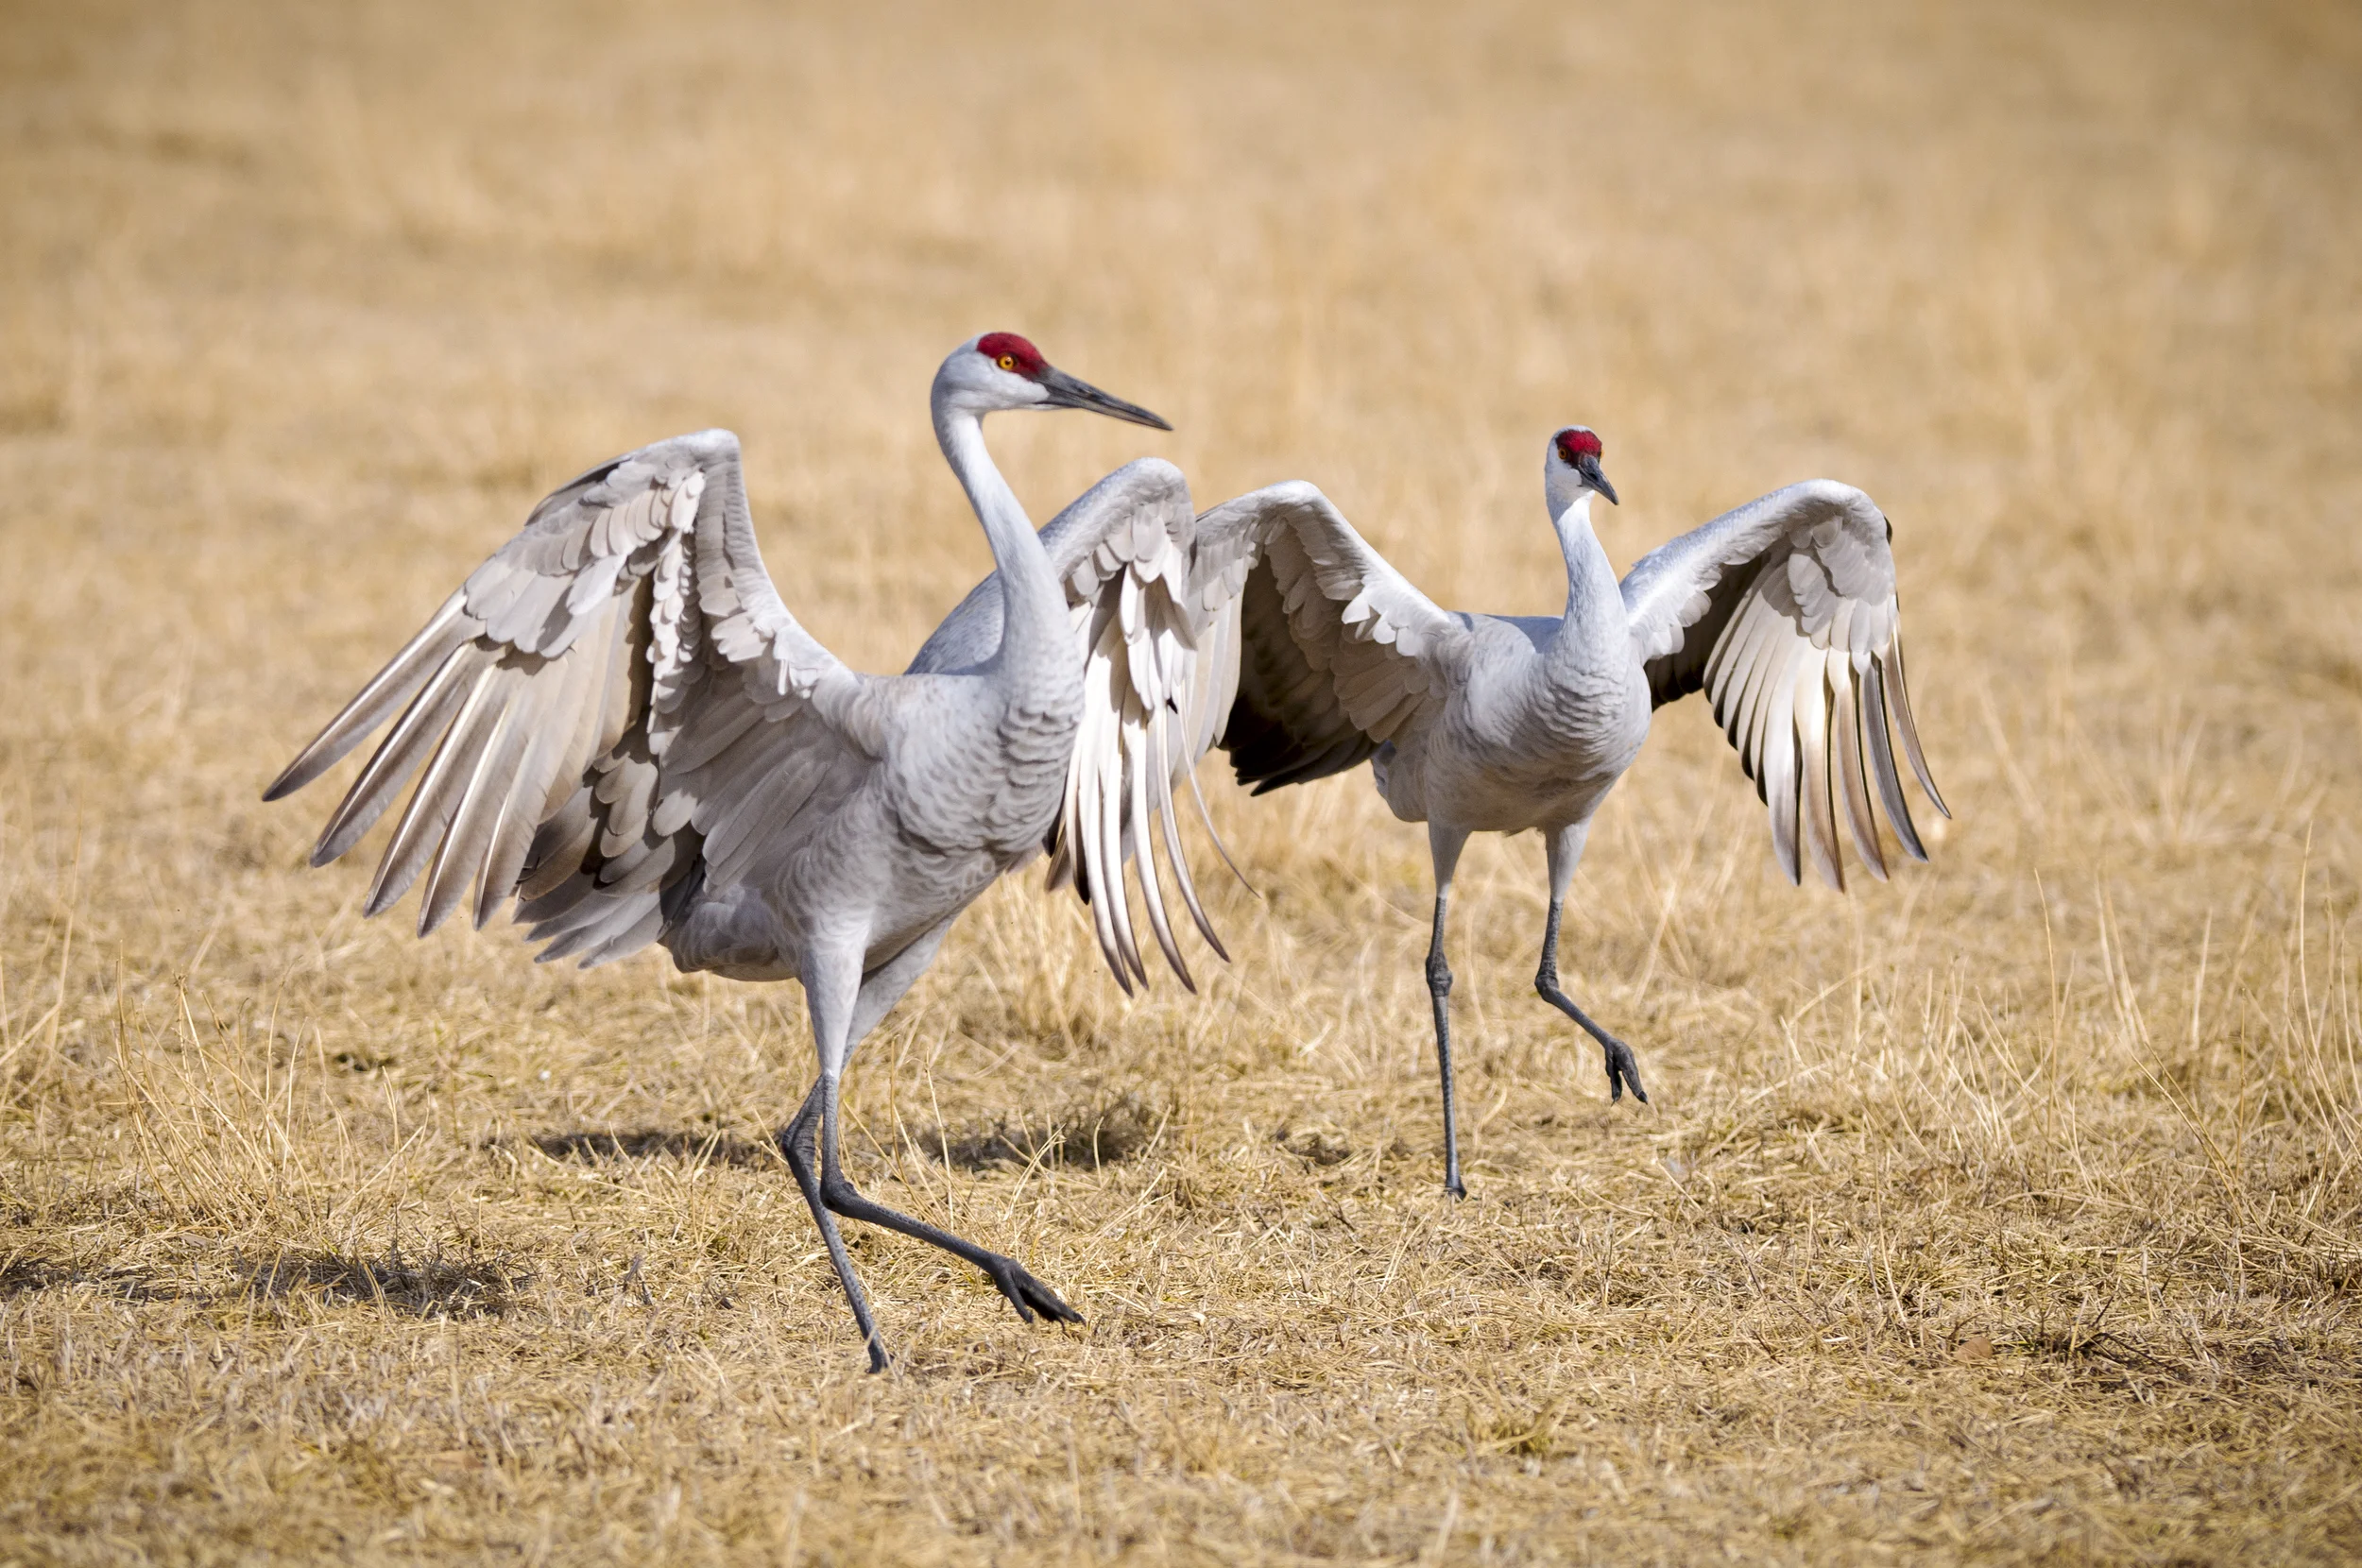 Sandhill cranes doing a mating dance, flying, and eating in Soddy Daisy Tennessee